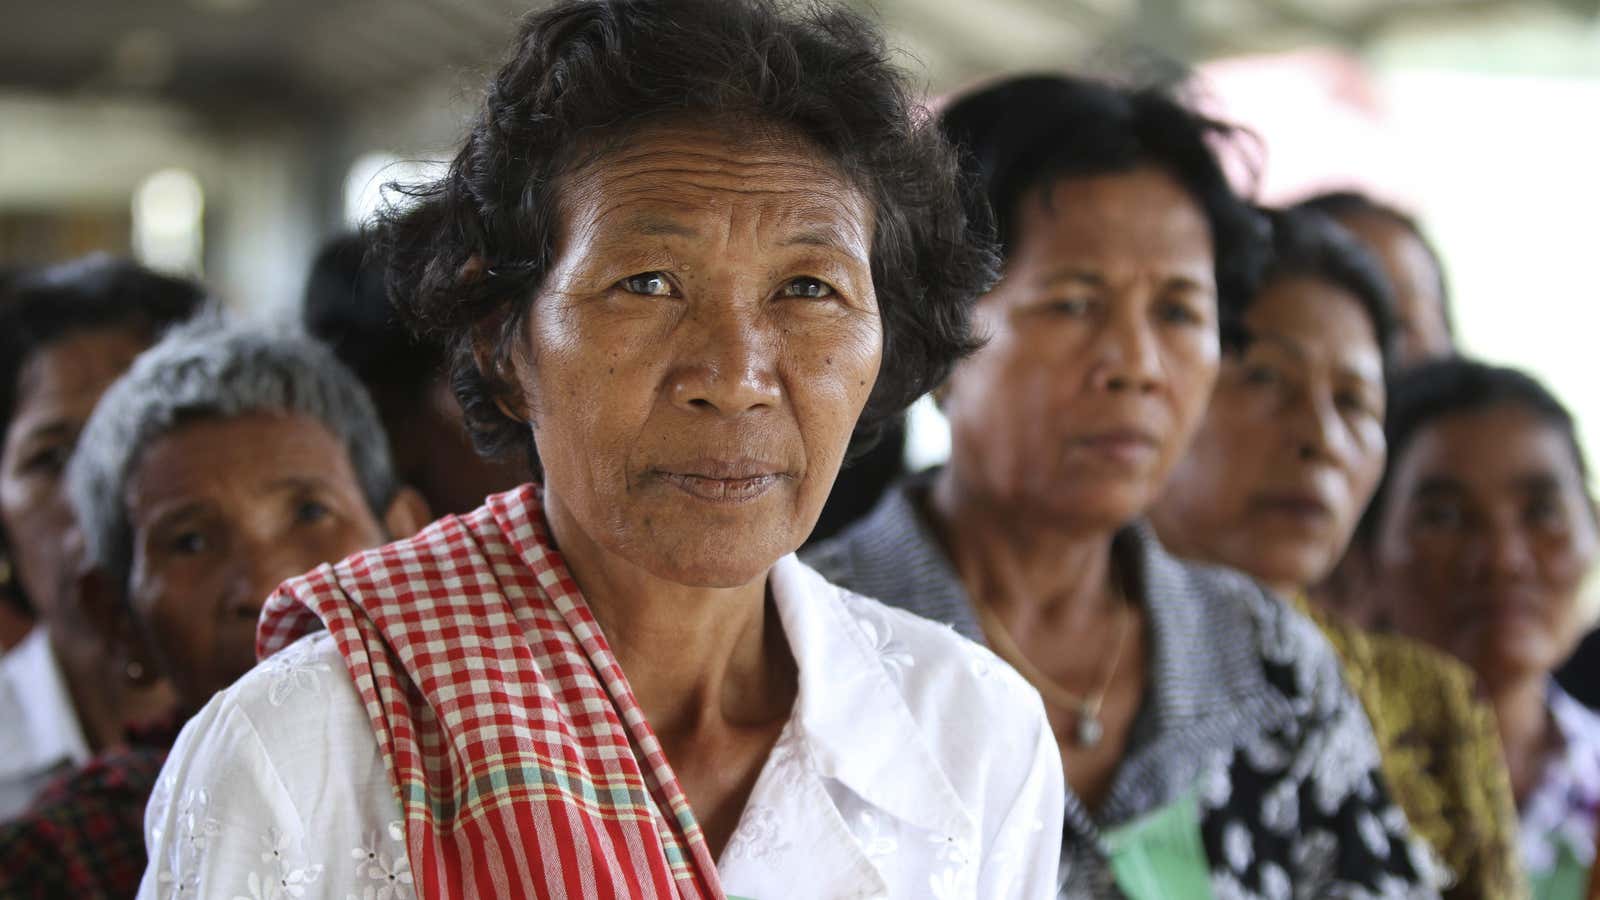 Women forced into arranged marriages during the Khmer Rouge are now seeking justice in a UN-backed court.